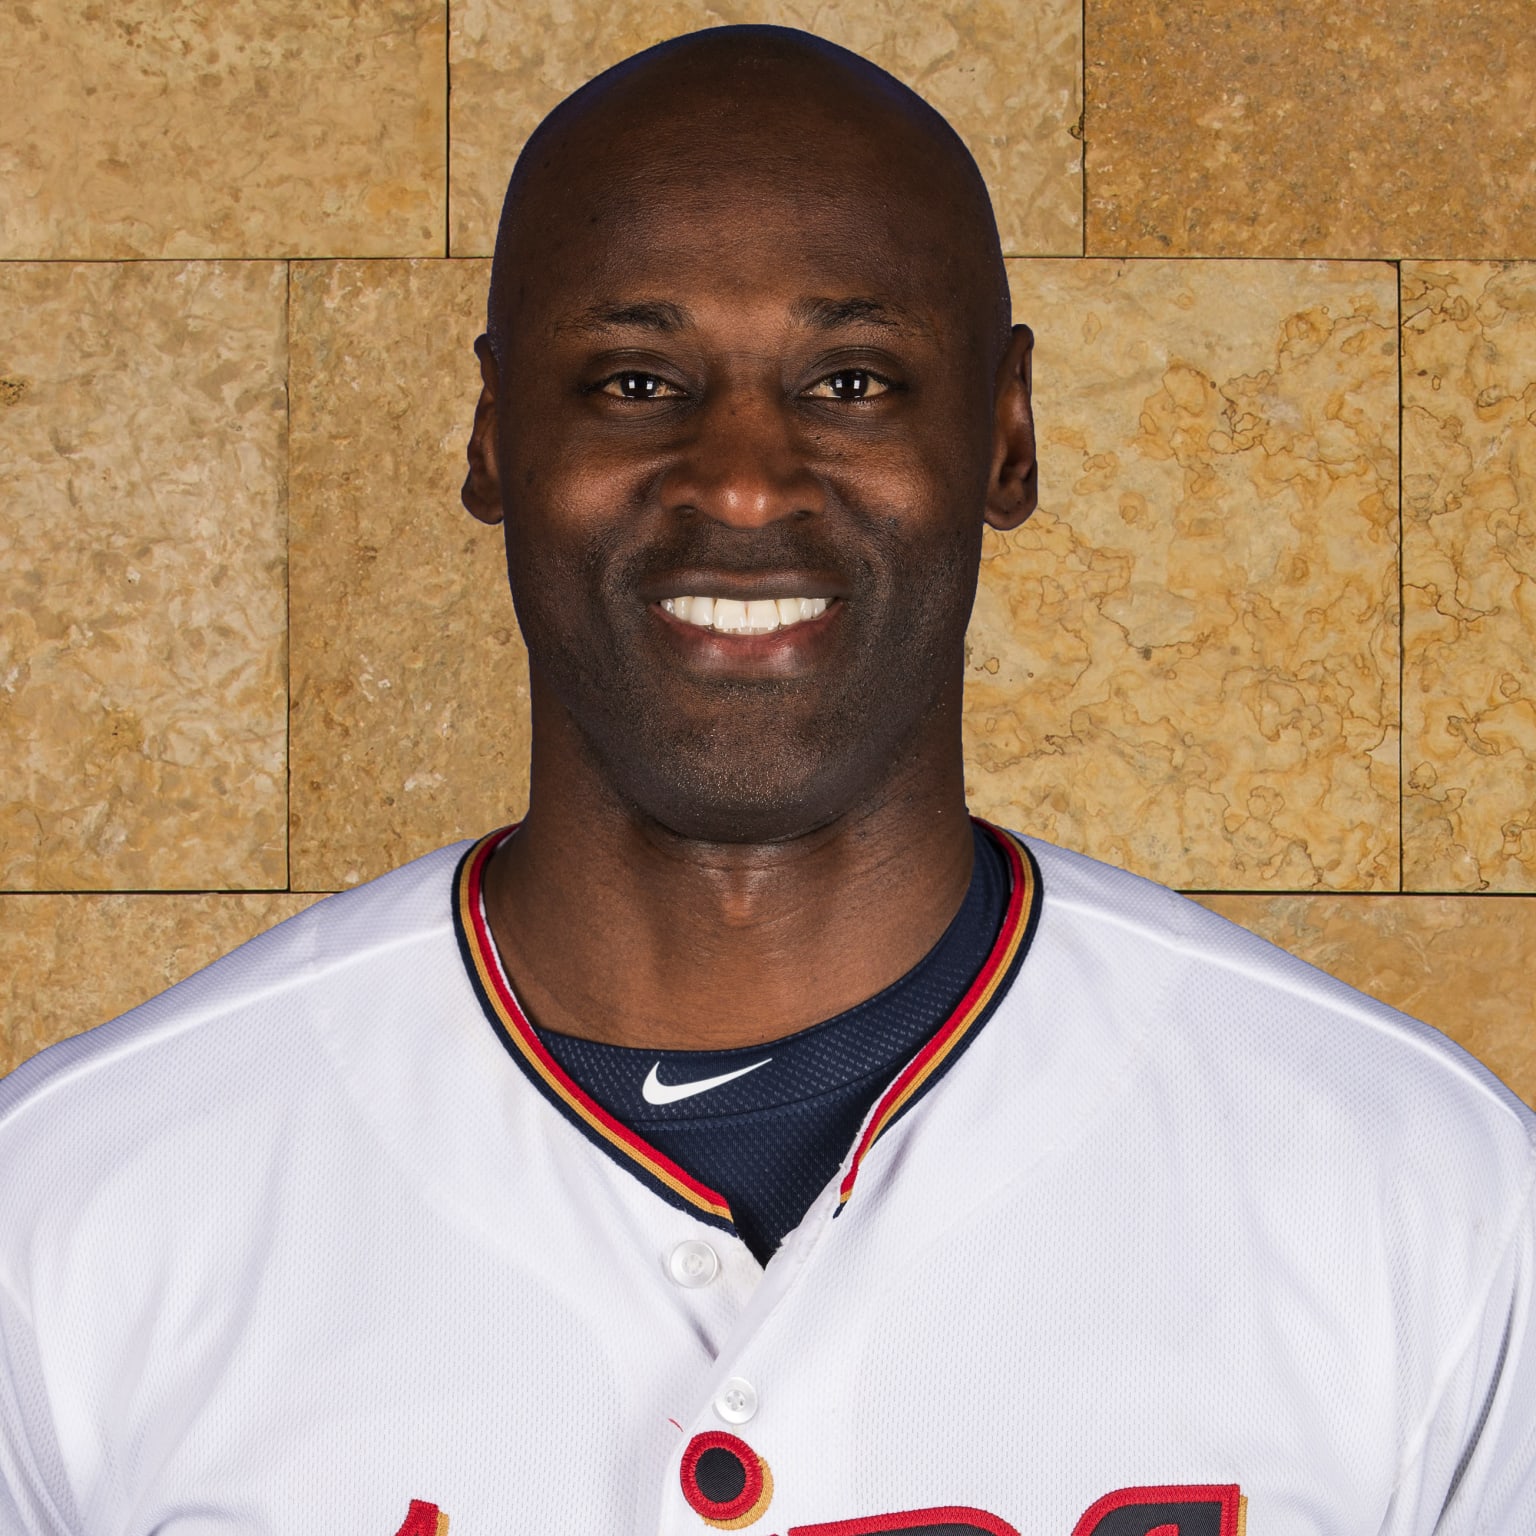 Twins should give LaTroy Hawkins a prominent position coaching